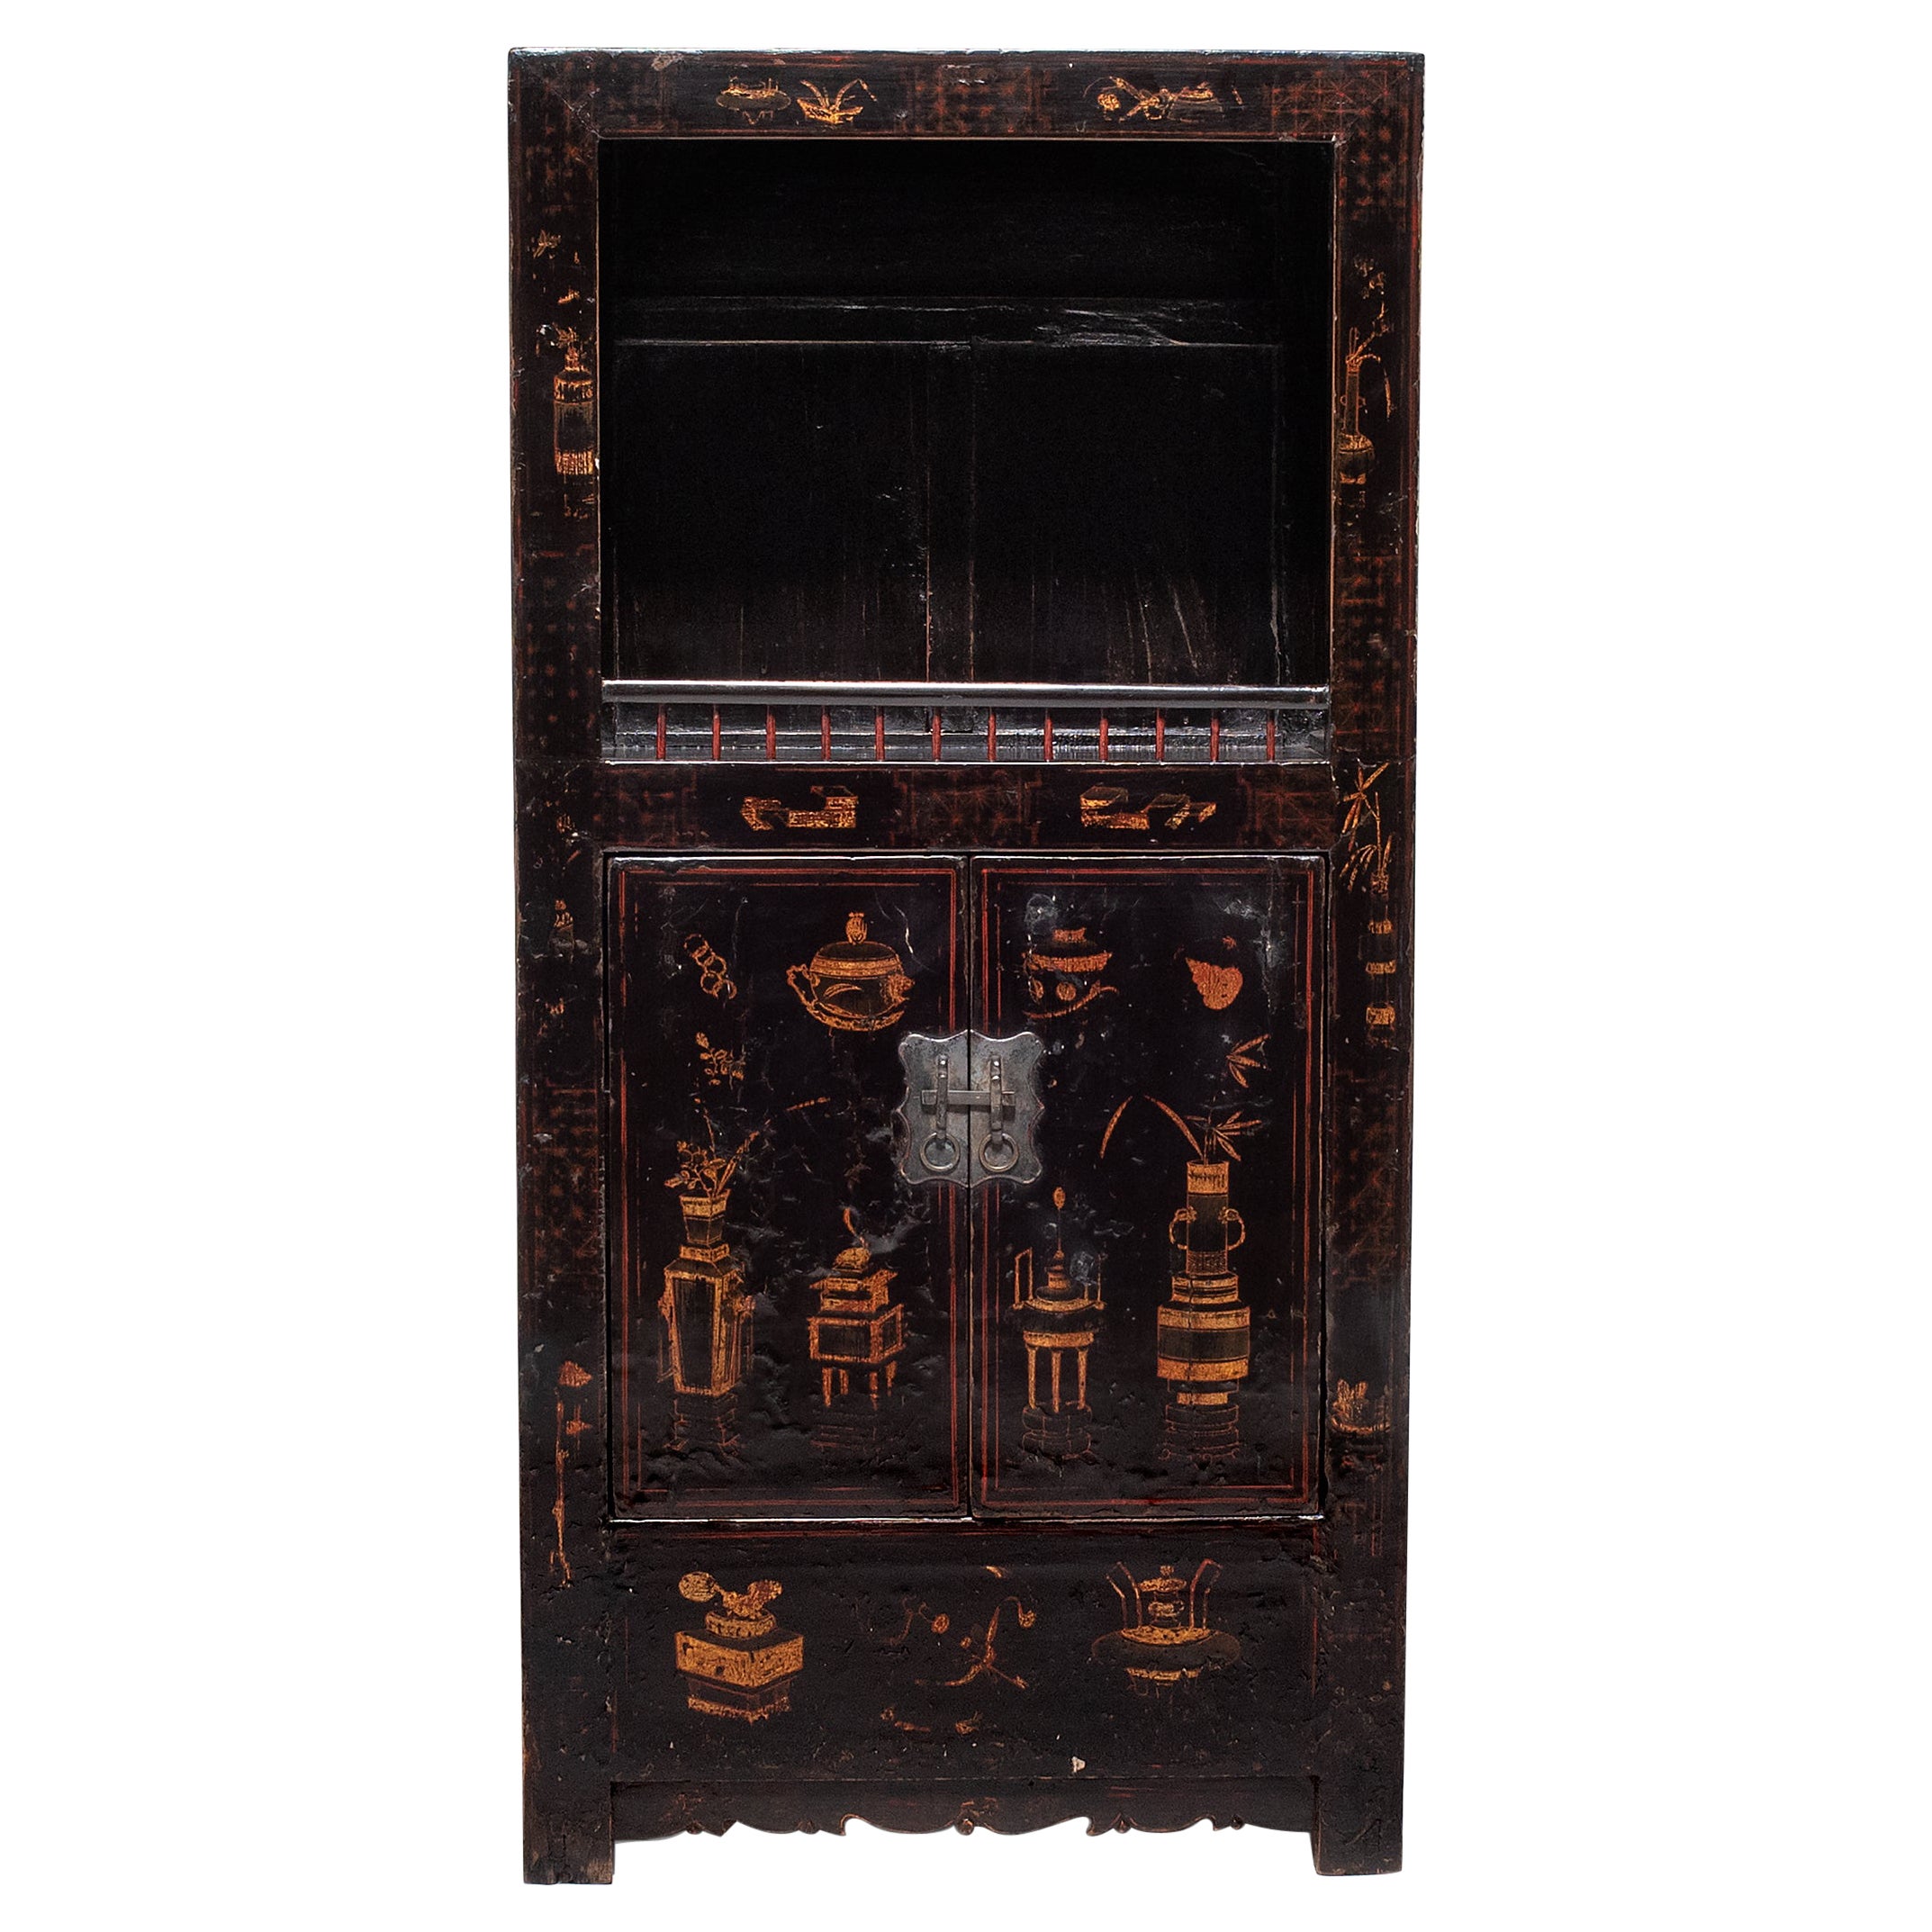 Chinese Painted Book Cabinet, c. 1850